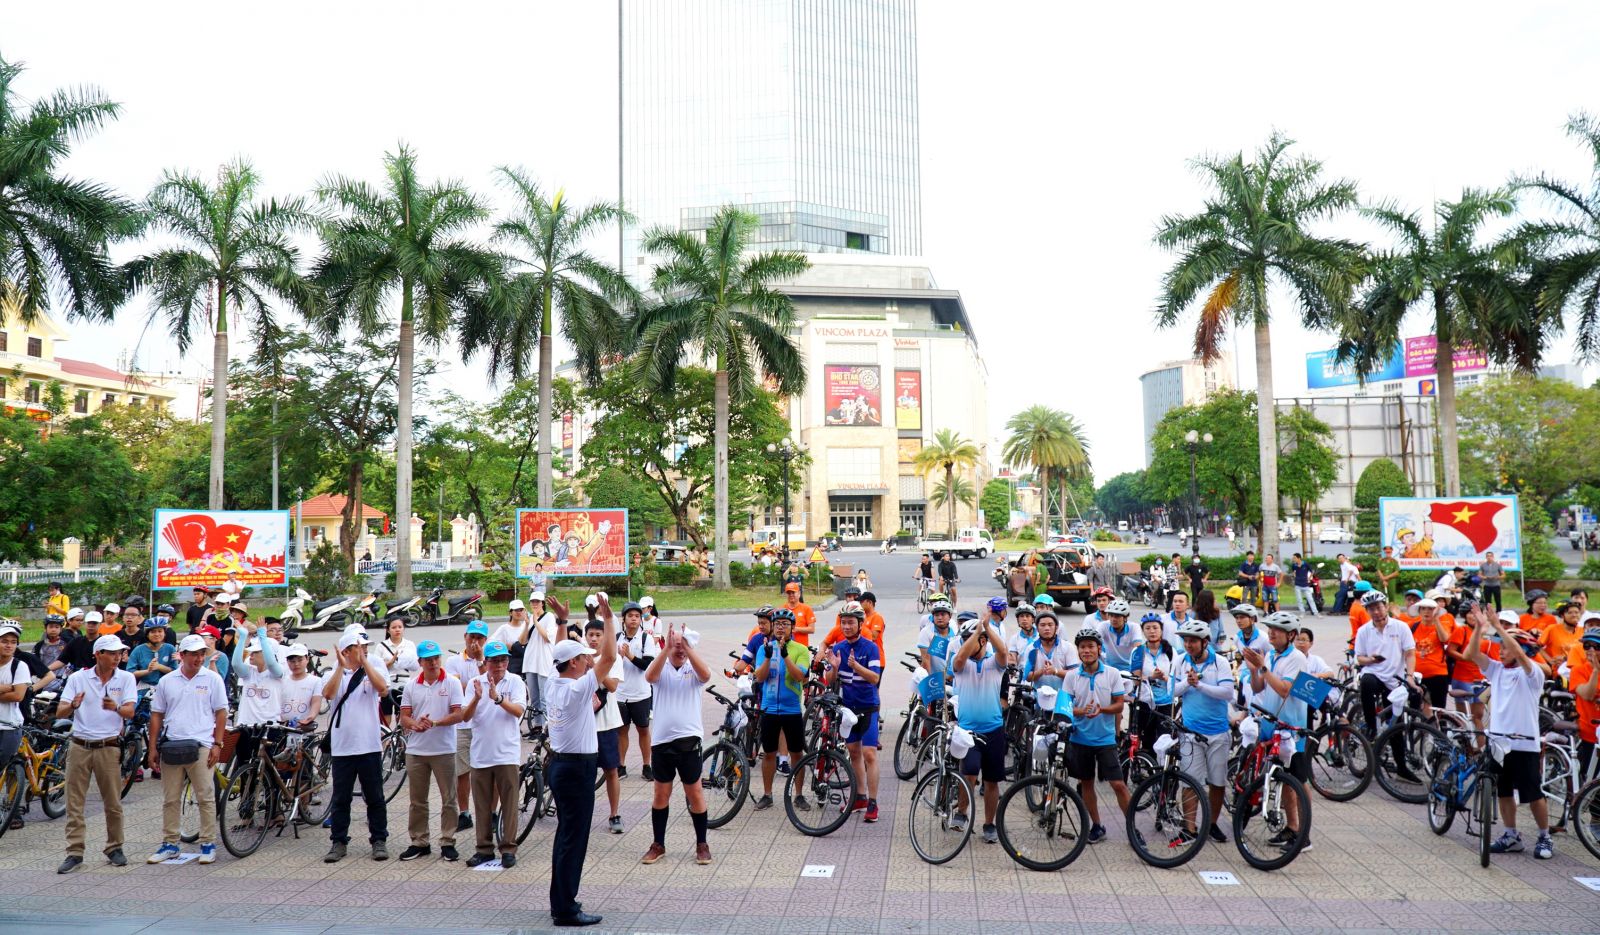 At 6 am, more than 200 people were present at the Cultural and Cinema Center to join in the garbage collection activity and calling on the community to use bicycles to reduce emissions